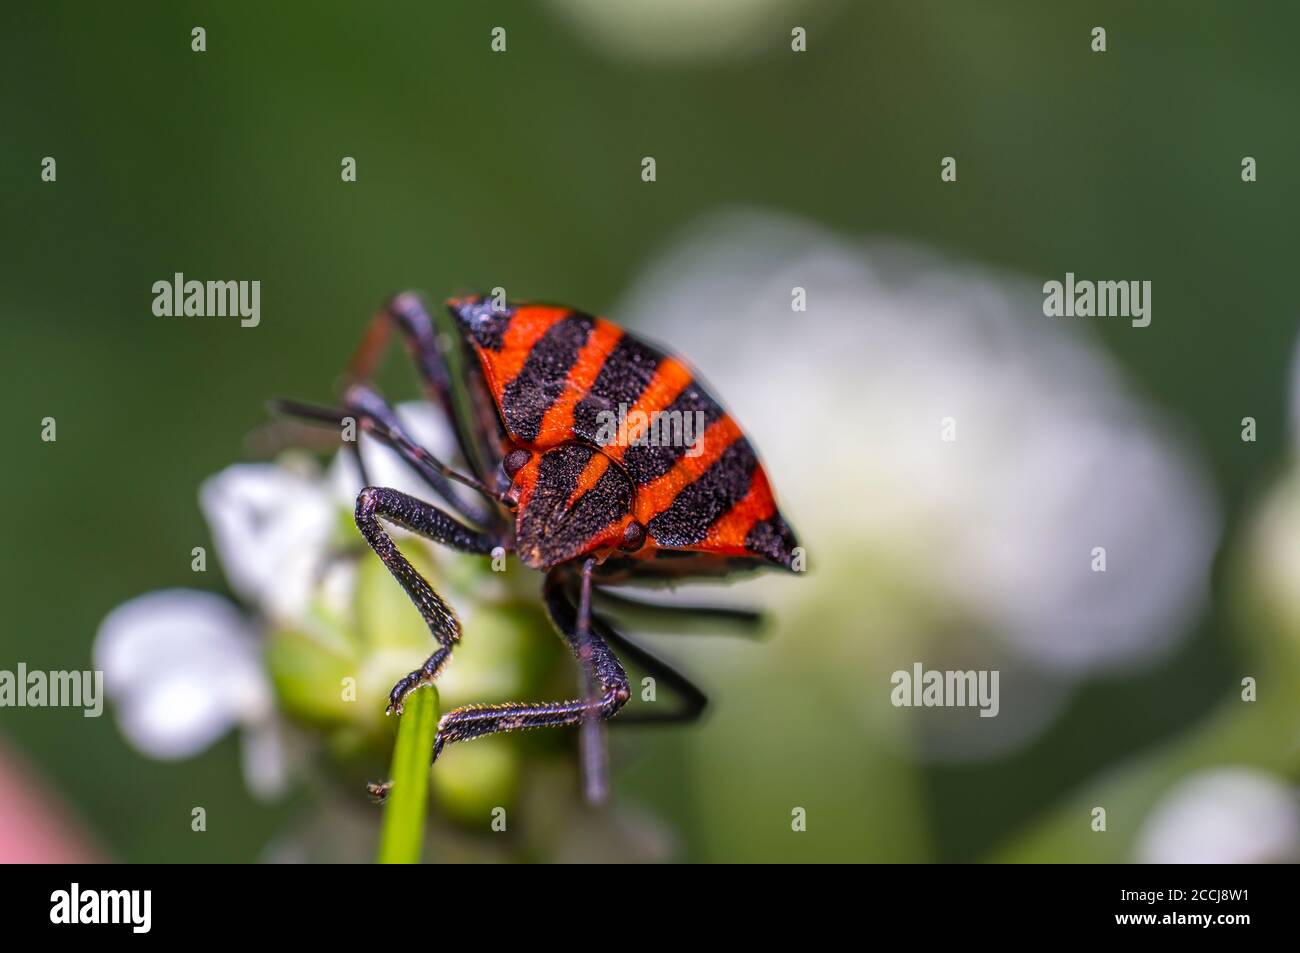 red black striped bug on blade of grass Stock Photo